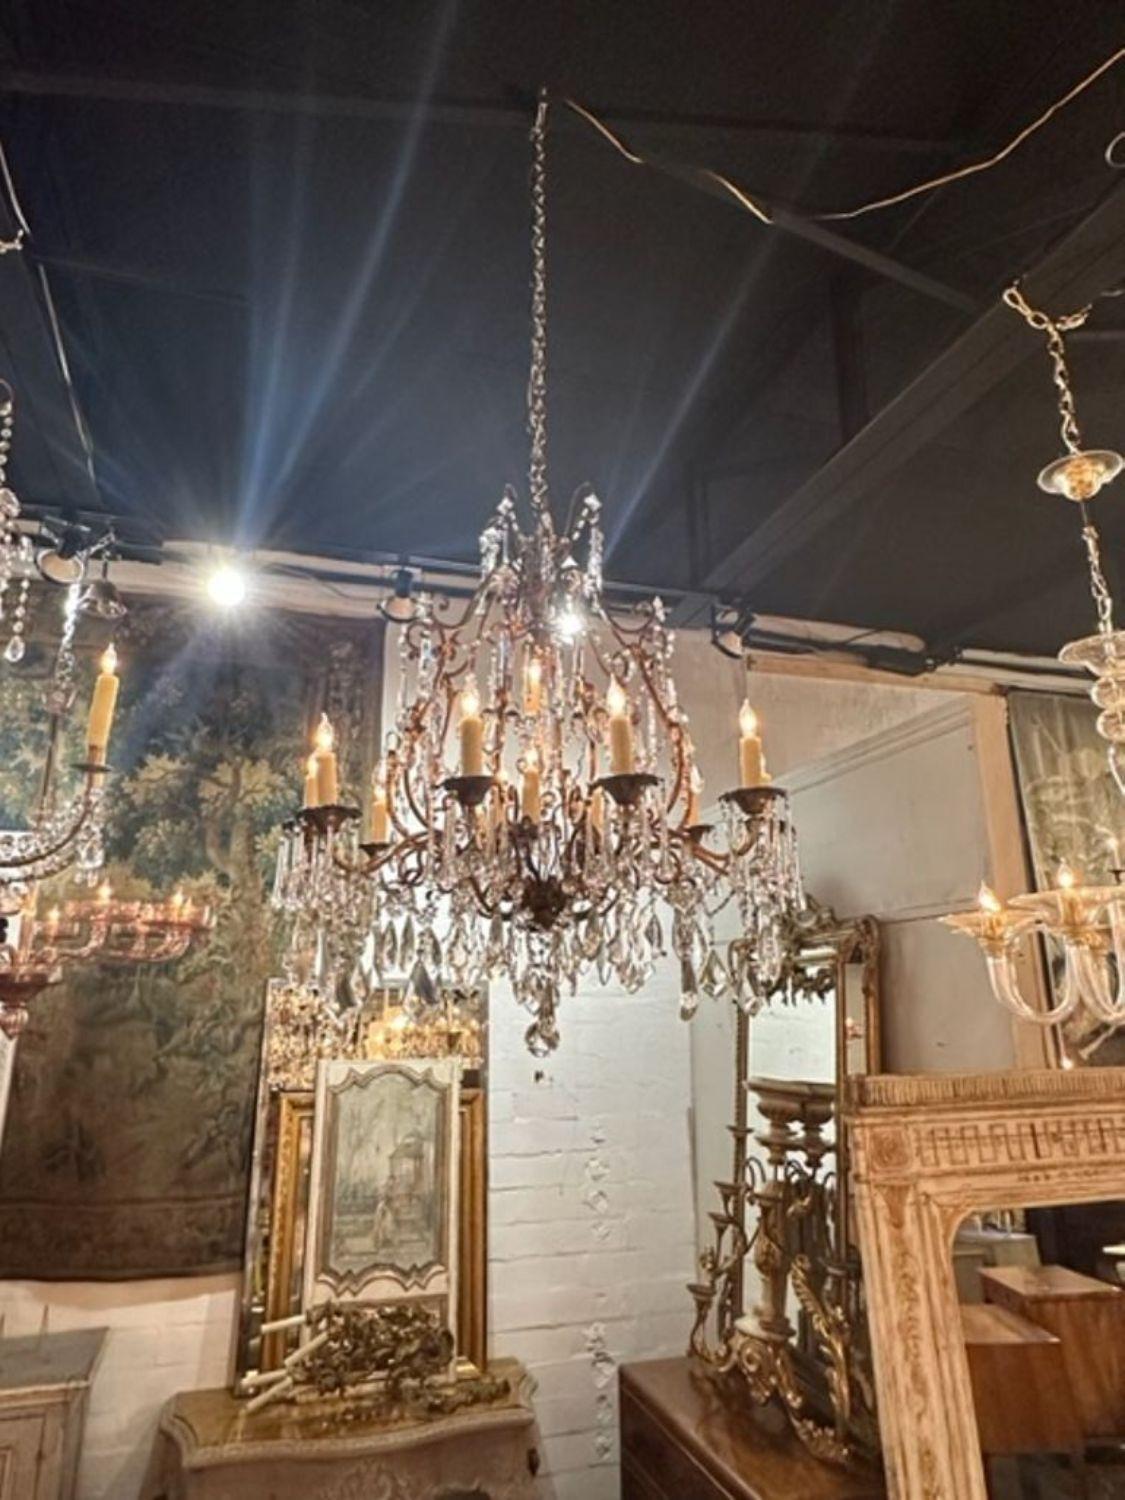 Wonderful pair of antique Italian crystal and amethyst chandeliers with 14 lights. Covered in gorgeous crystals on a beautiful curved base. A lovely pair!